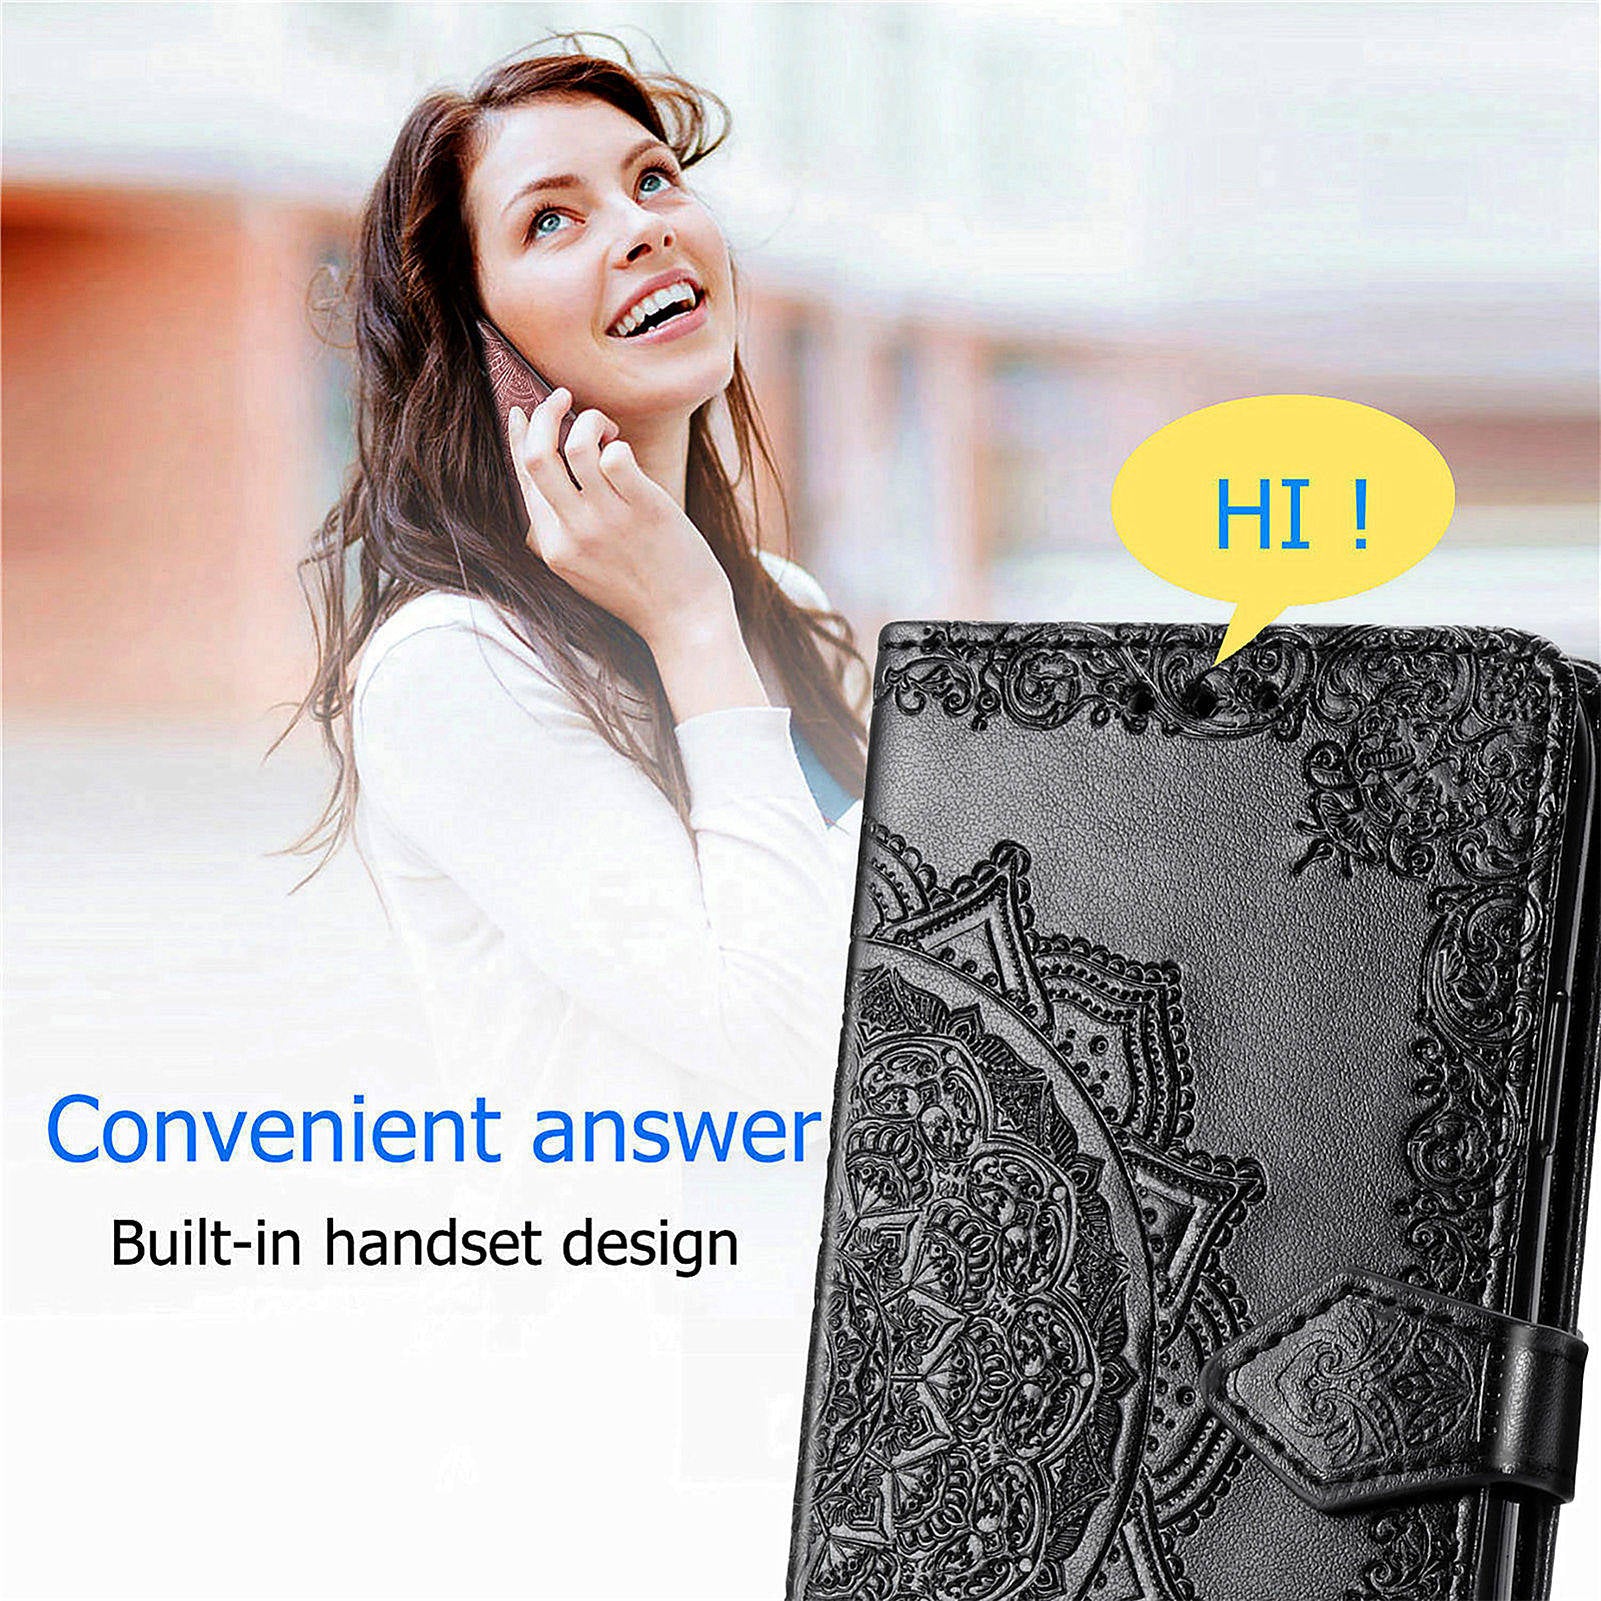 For Sony Xperia 5 V Case Card Slots Wallet PU Leather Embossed Phone Cover - Black